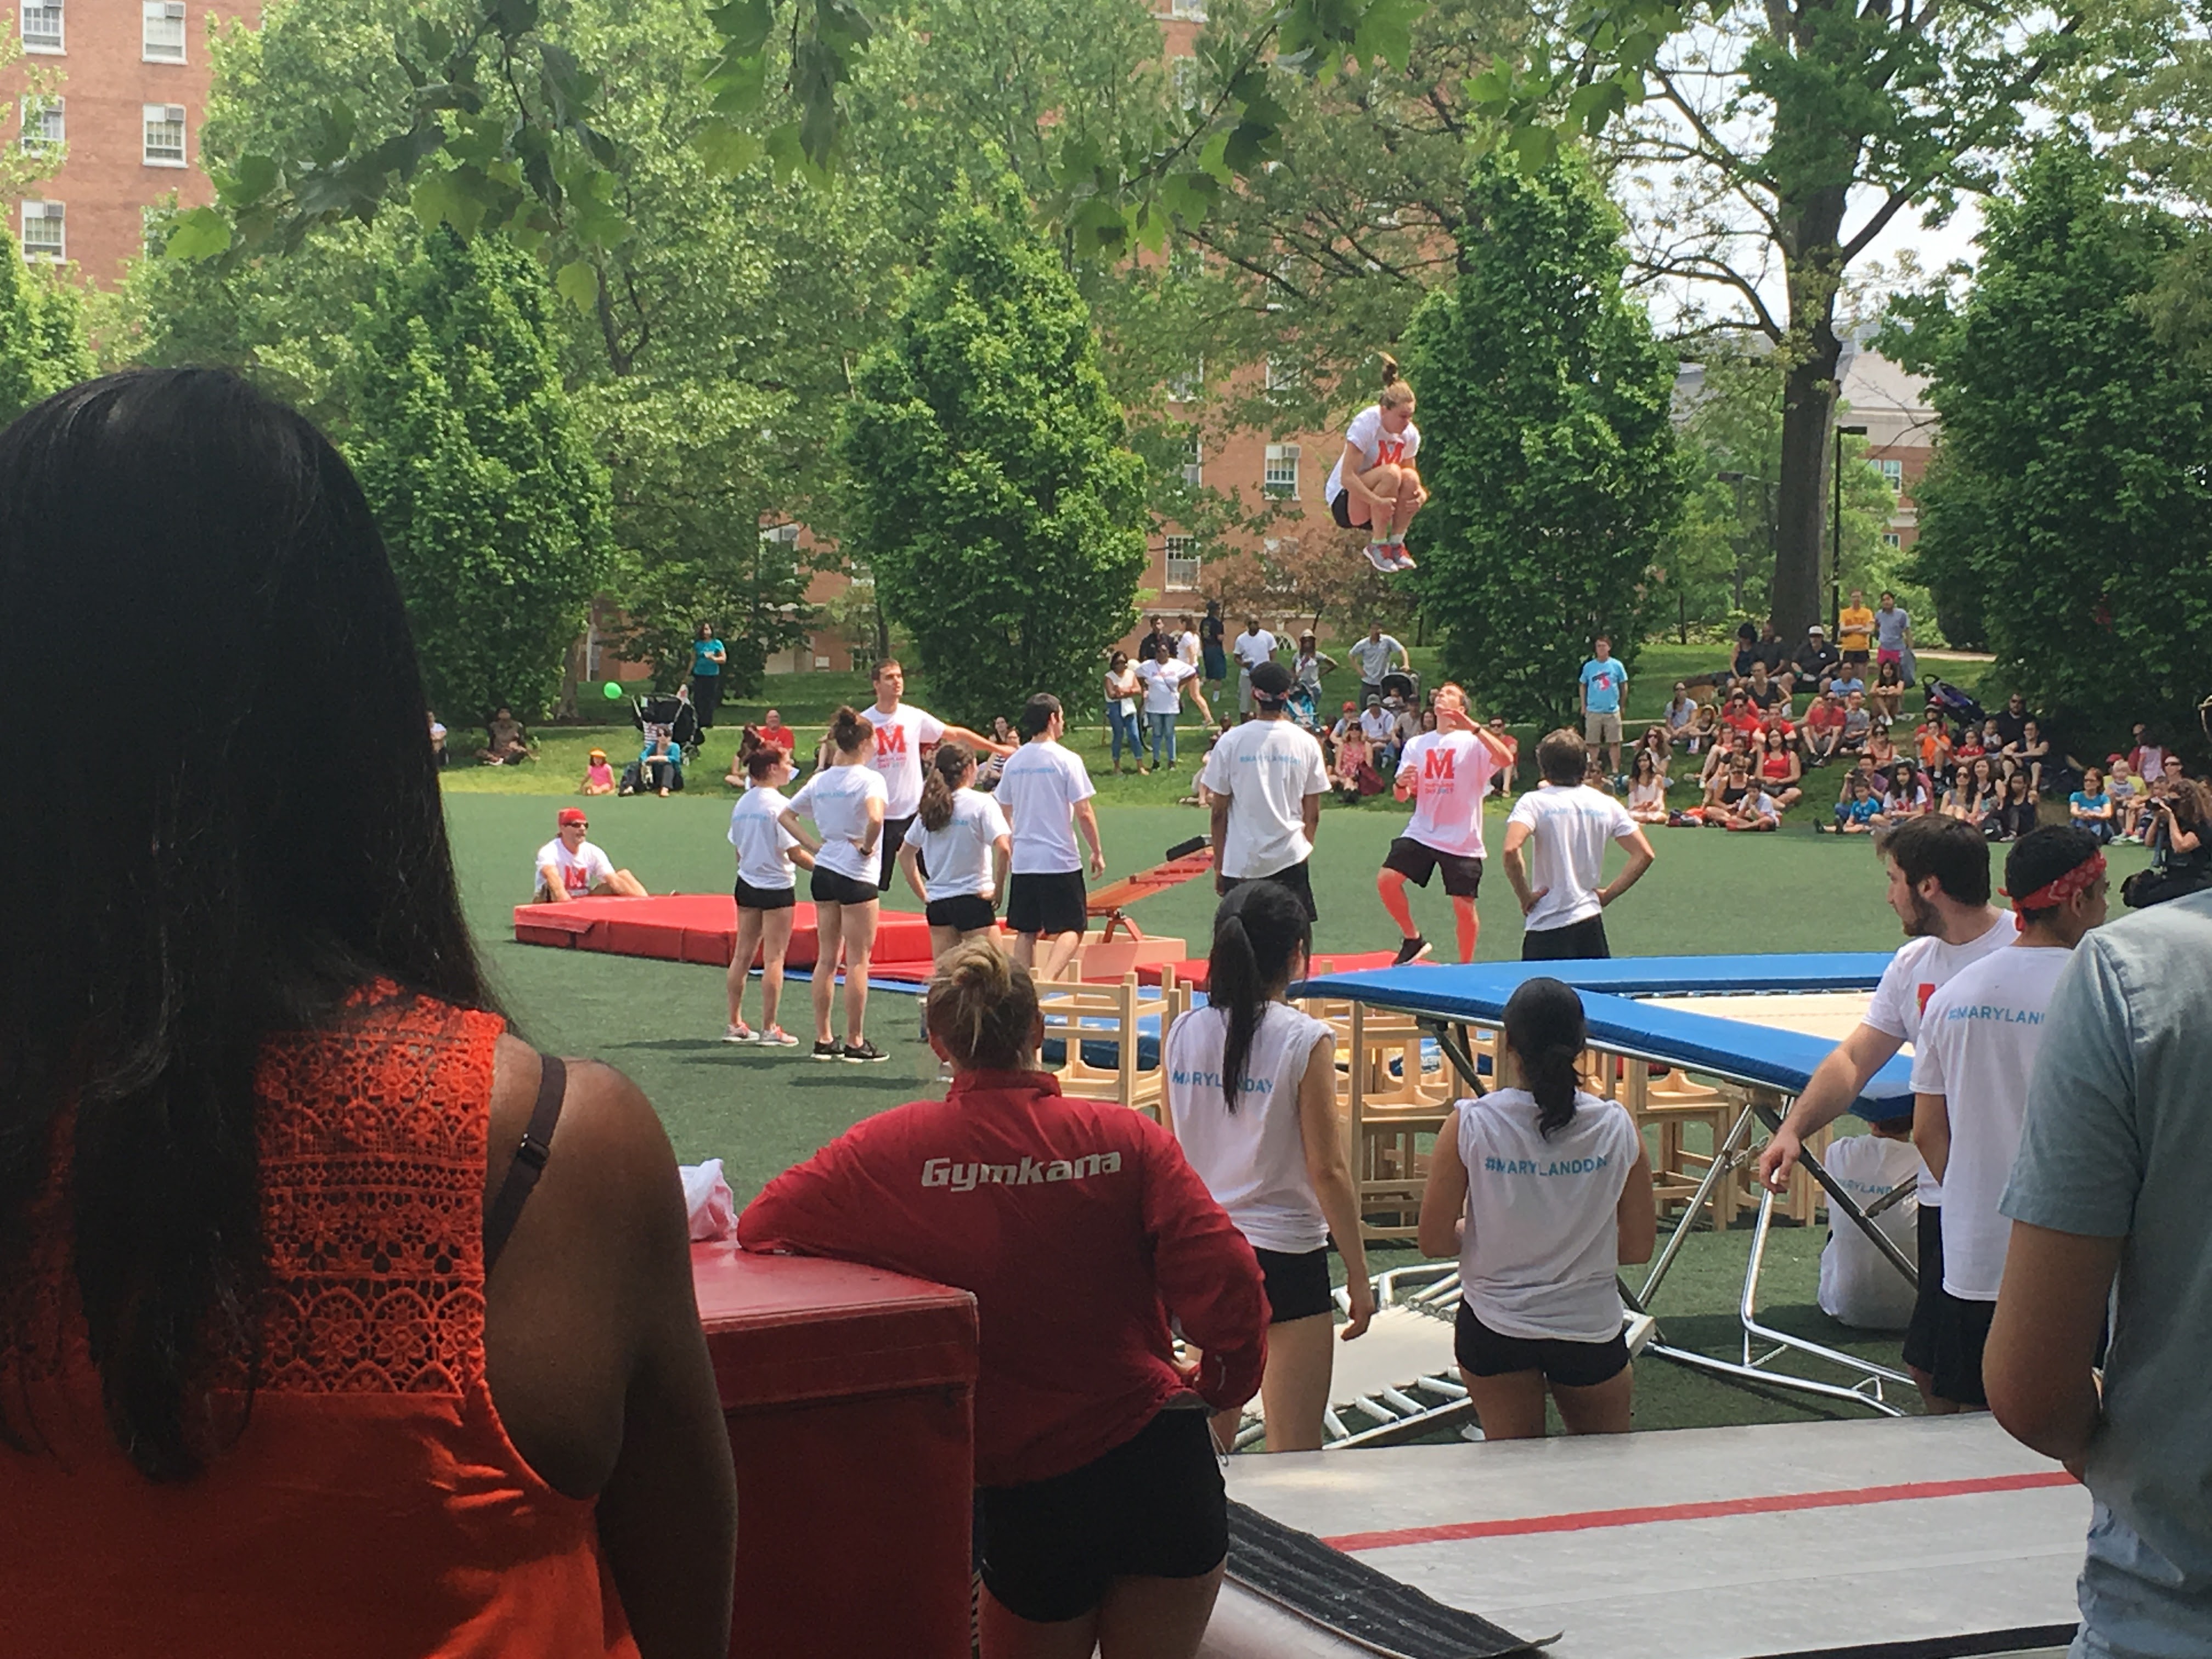 College Park community members and University of Maryland students came out to watch the Gymkana performance at Maryland Day on Saturday, April 29, 2017 in College Park. (Abby Mergenmeier)